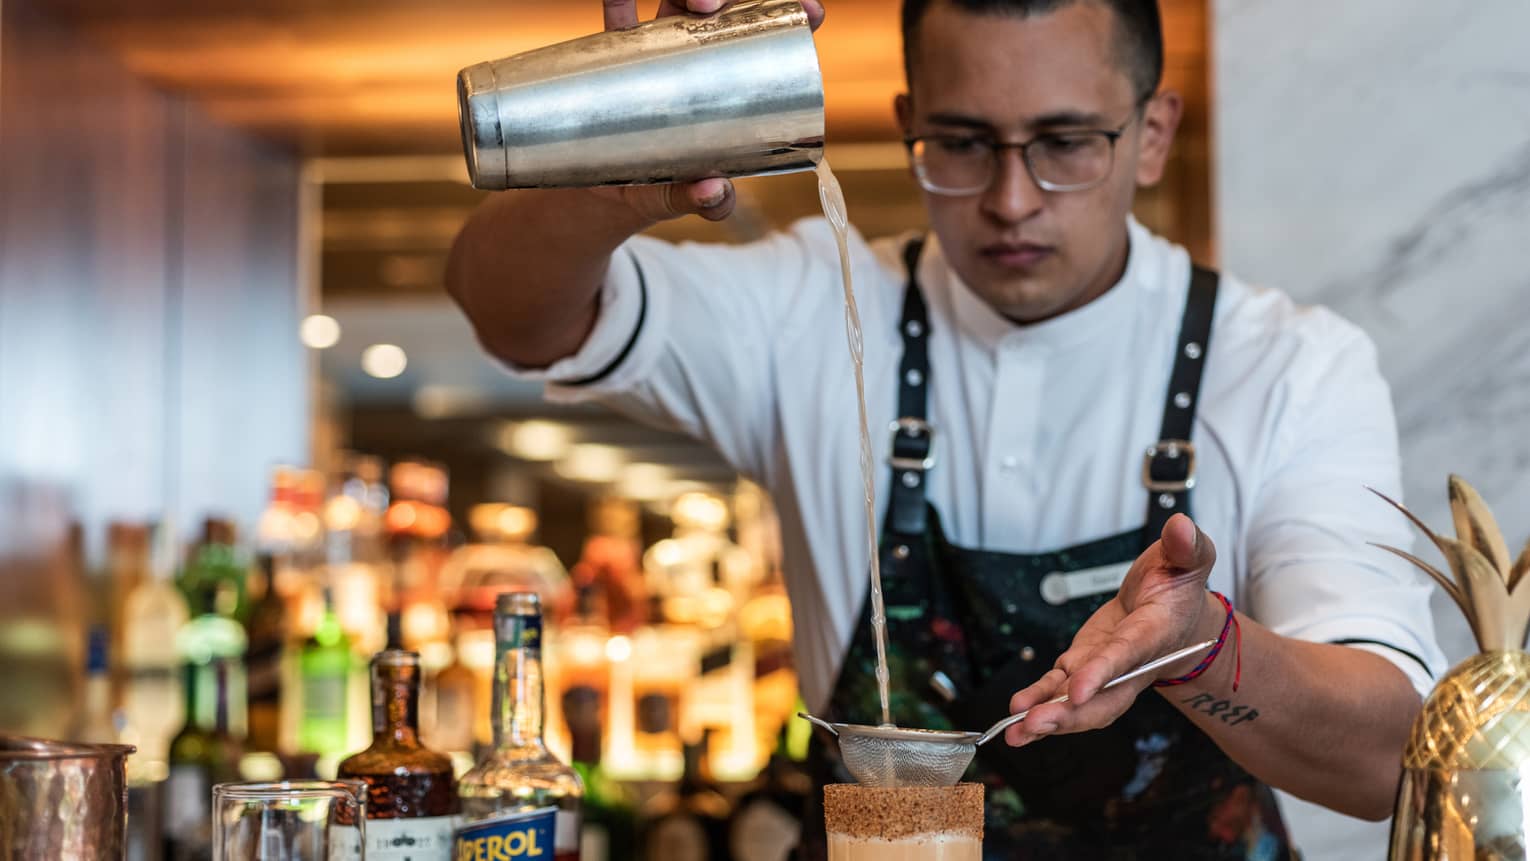 A man in a Four Seasons apron pours a drink through a sifter into a tall glass.